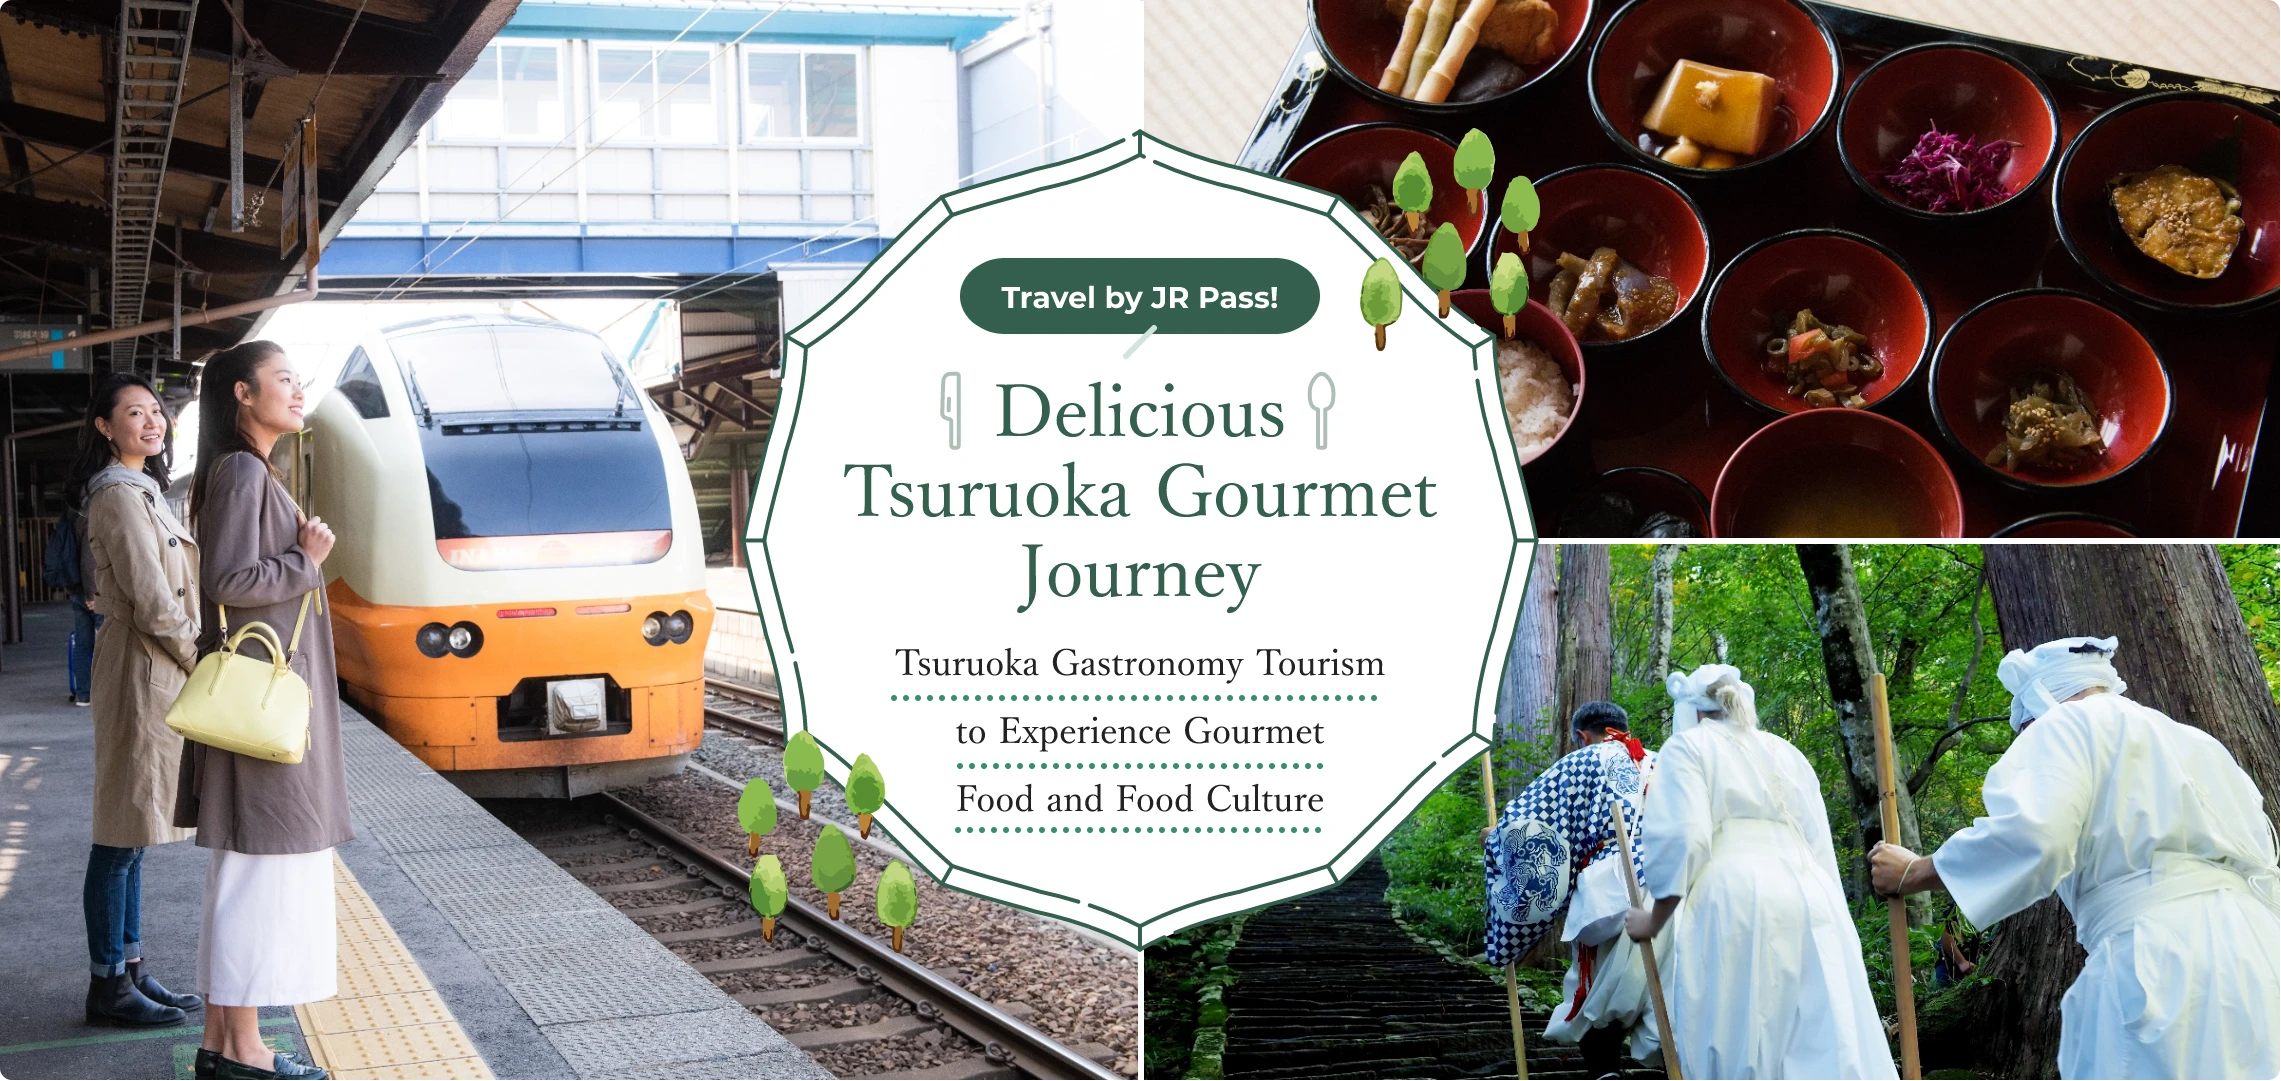 Travel by JR Pass! Tsuruoka Gastronomy Tourism to Experience Gourmet Food and Food Culture